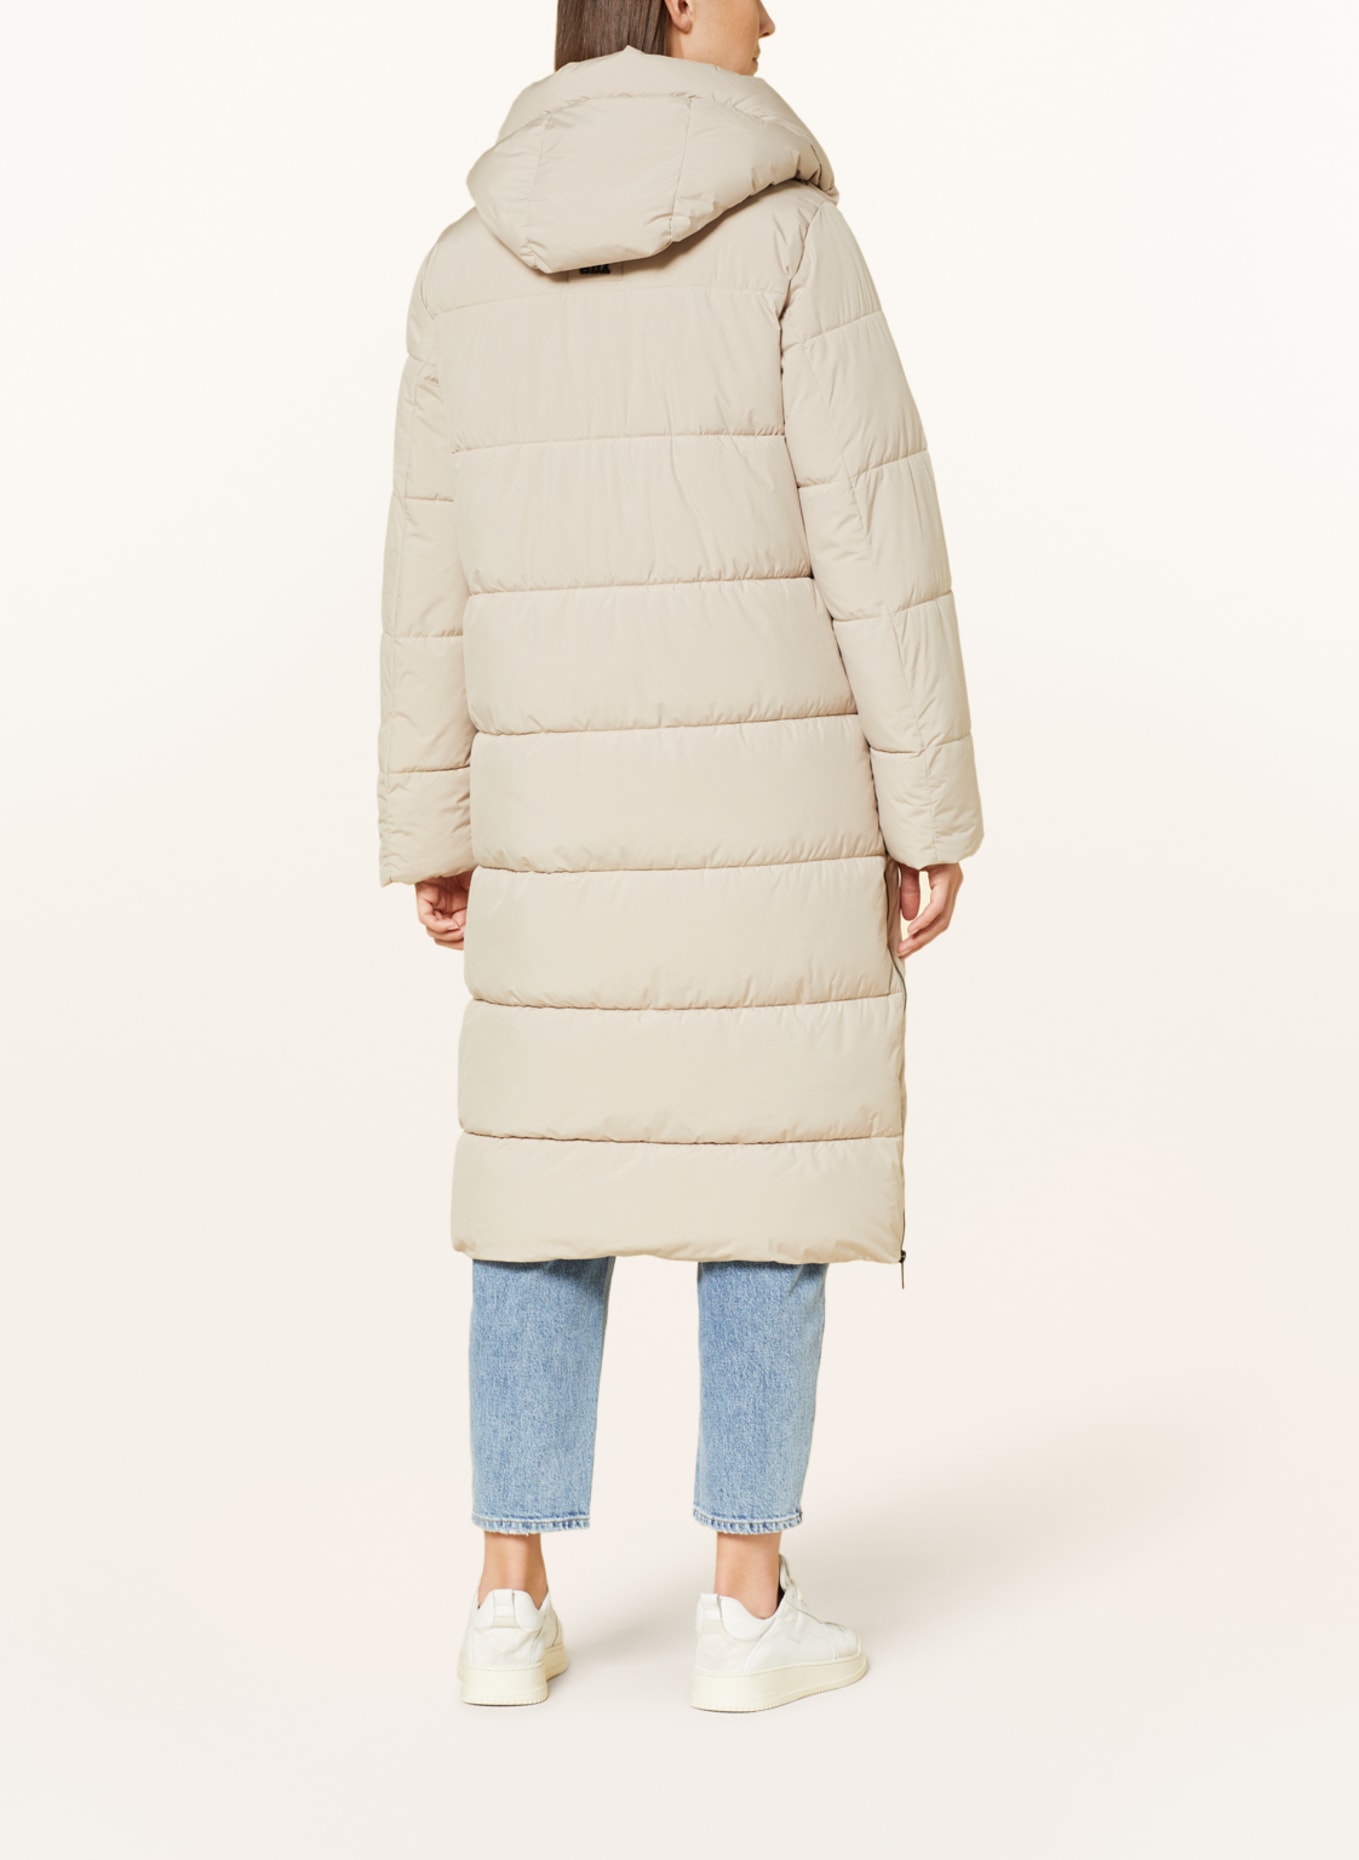 G.I.G.A. DX by killtec Quilted coat GW 50 in beige | Parkas